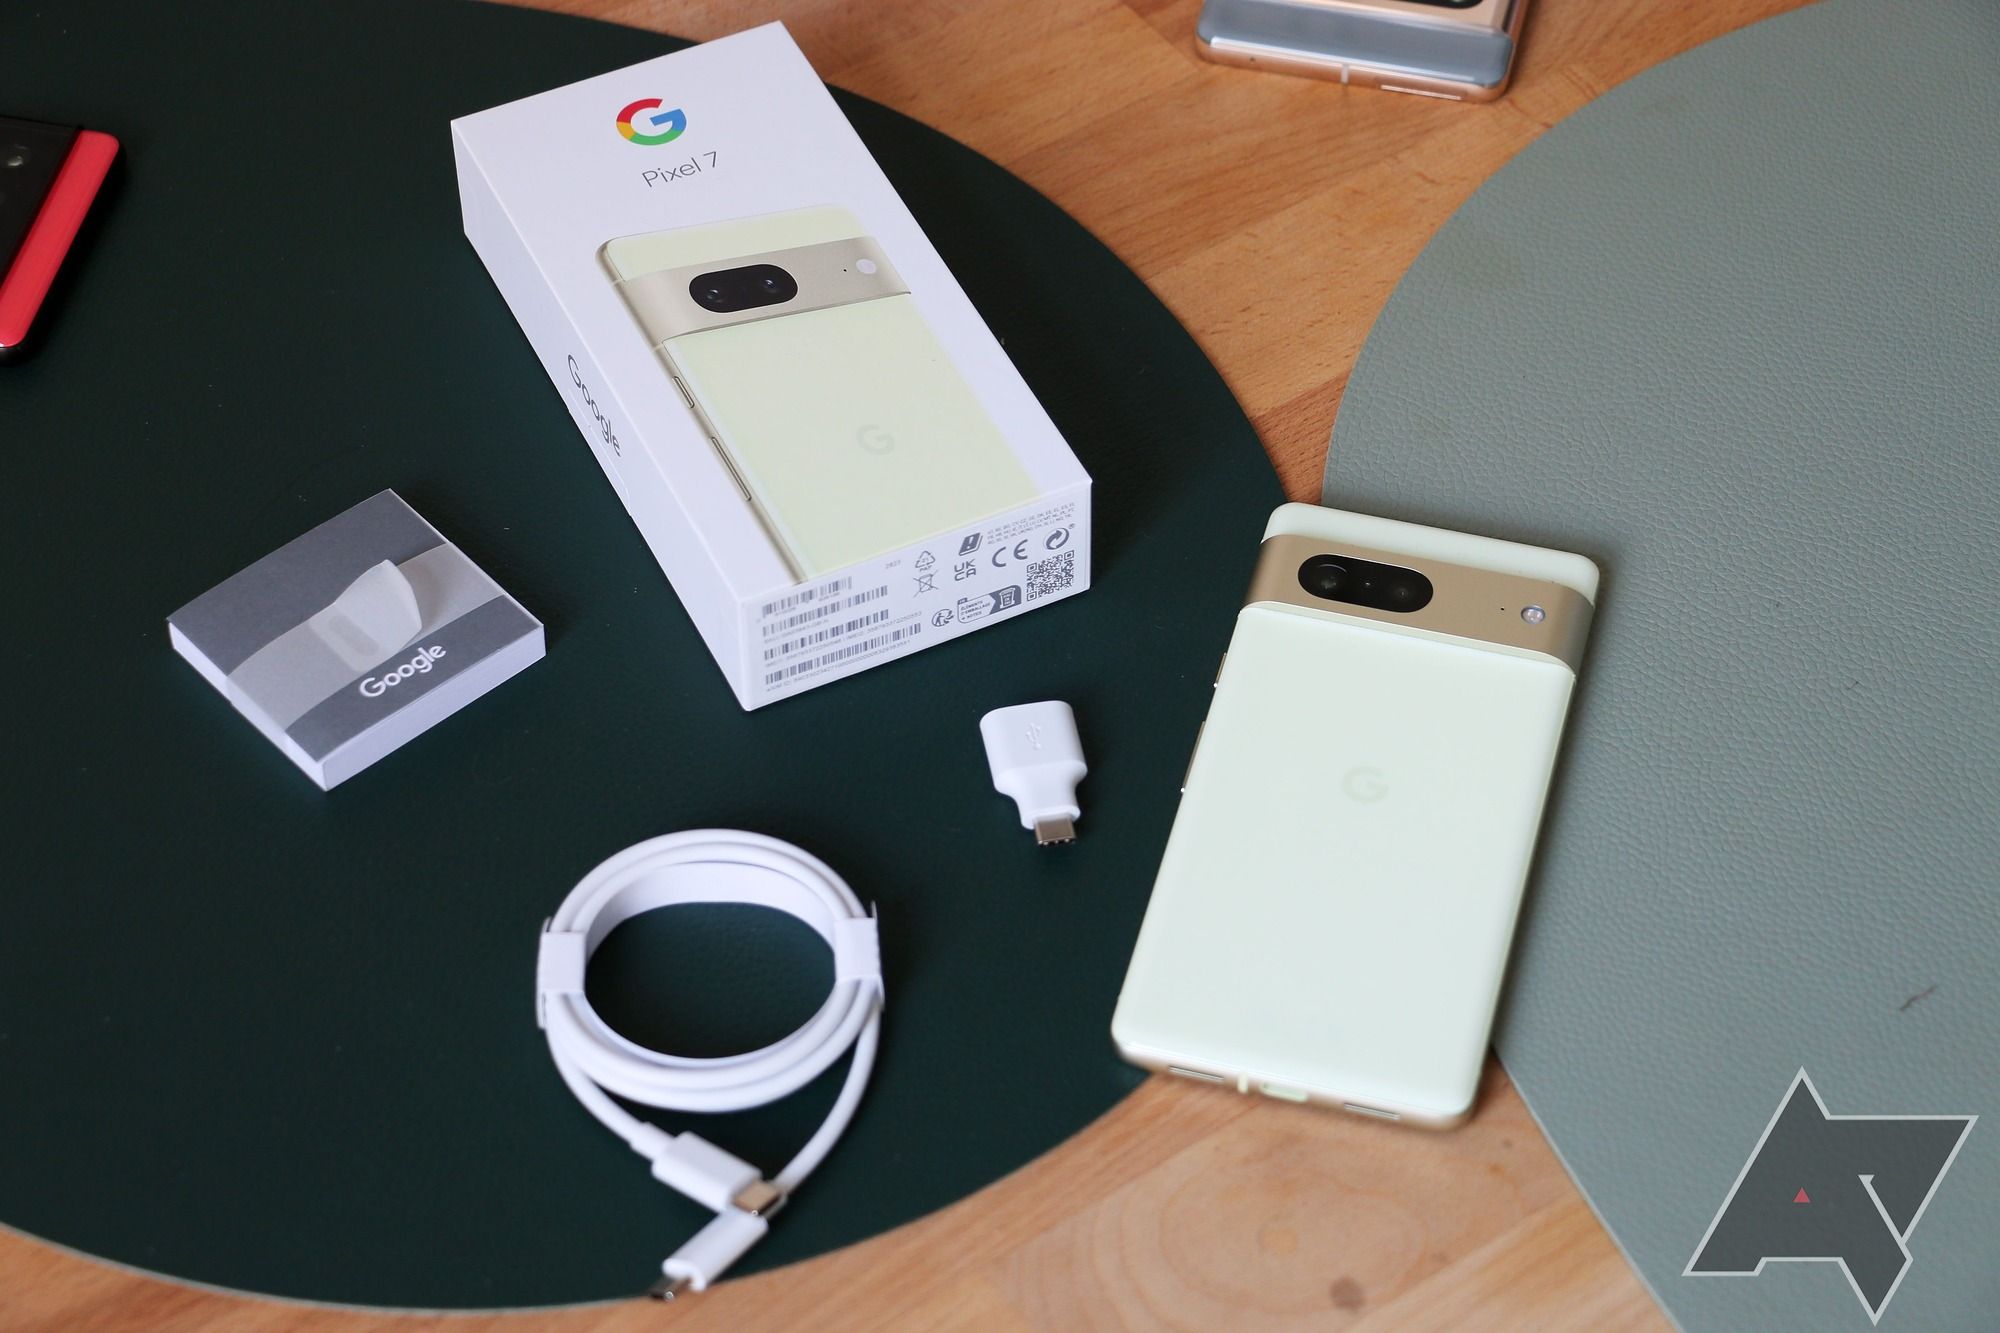 The Google Pixel 7 and the contents of its box laying spread out on a surface.